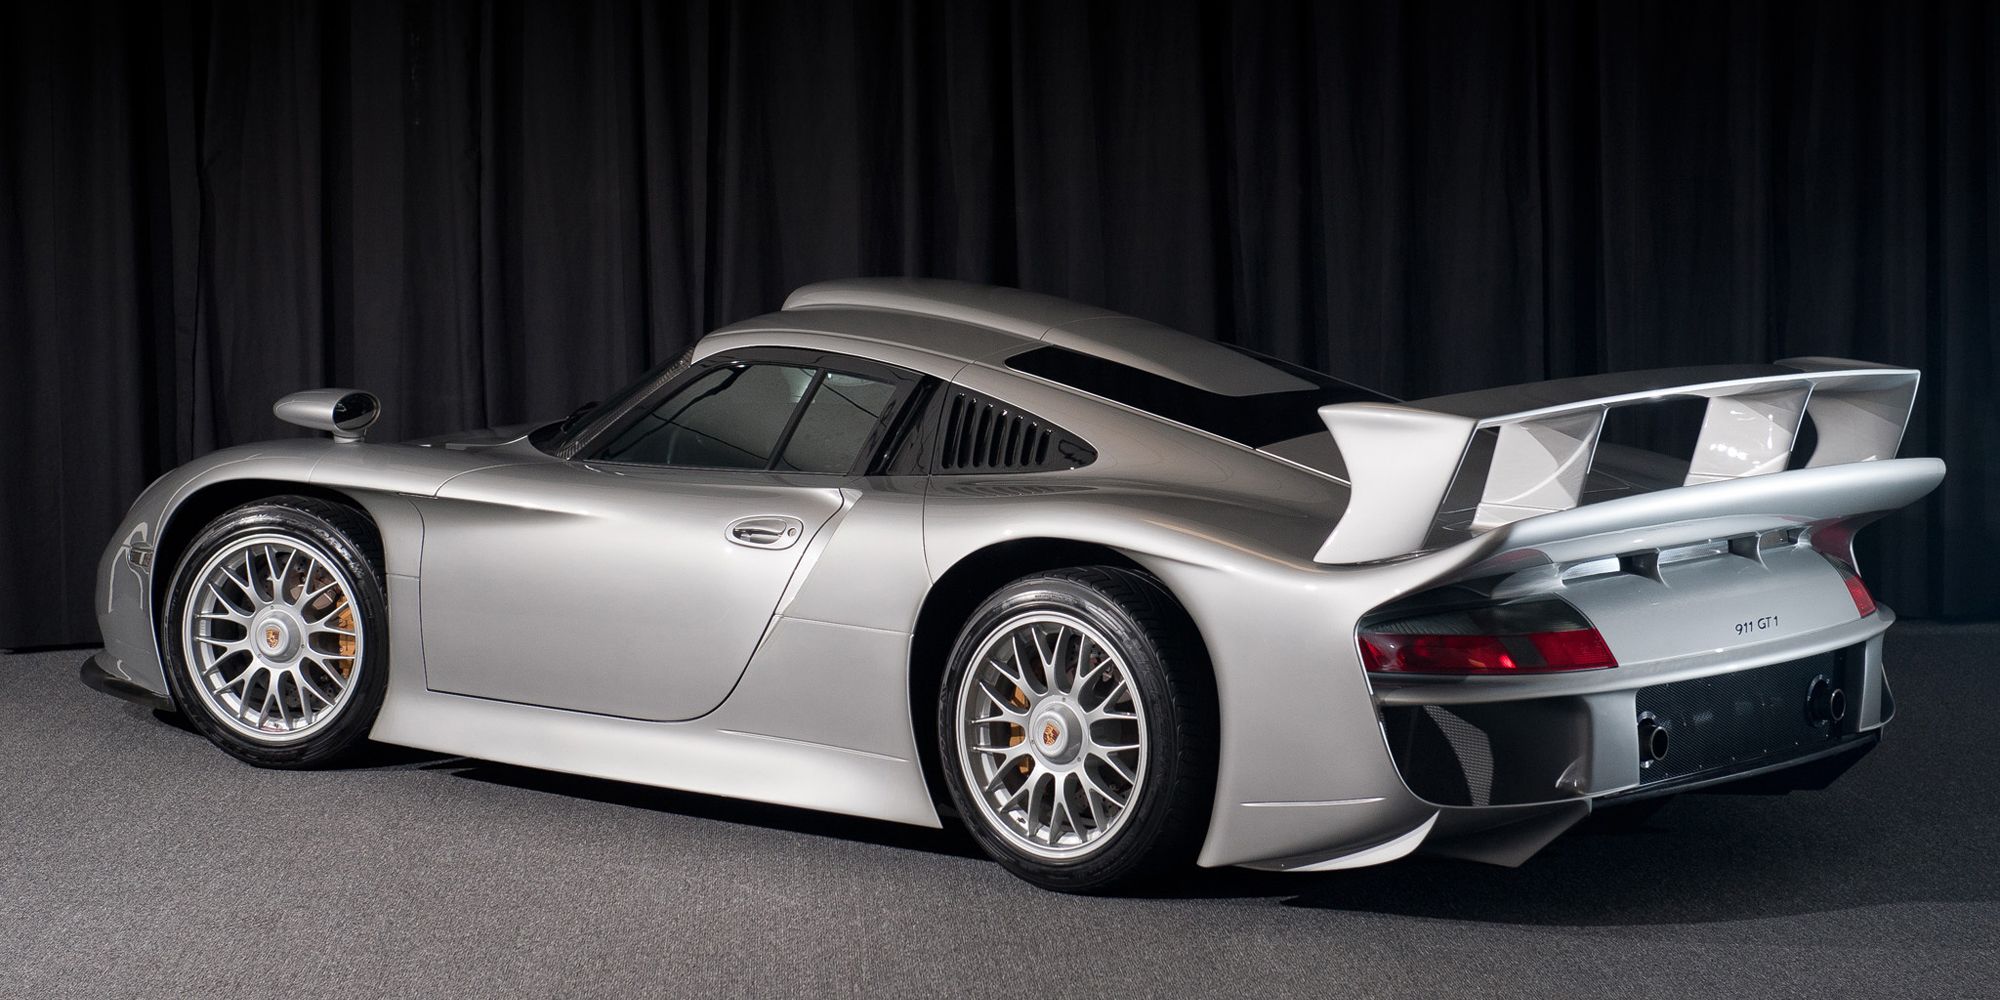 Rear 3/4 view of the 911 GT1